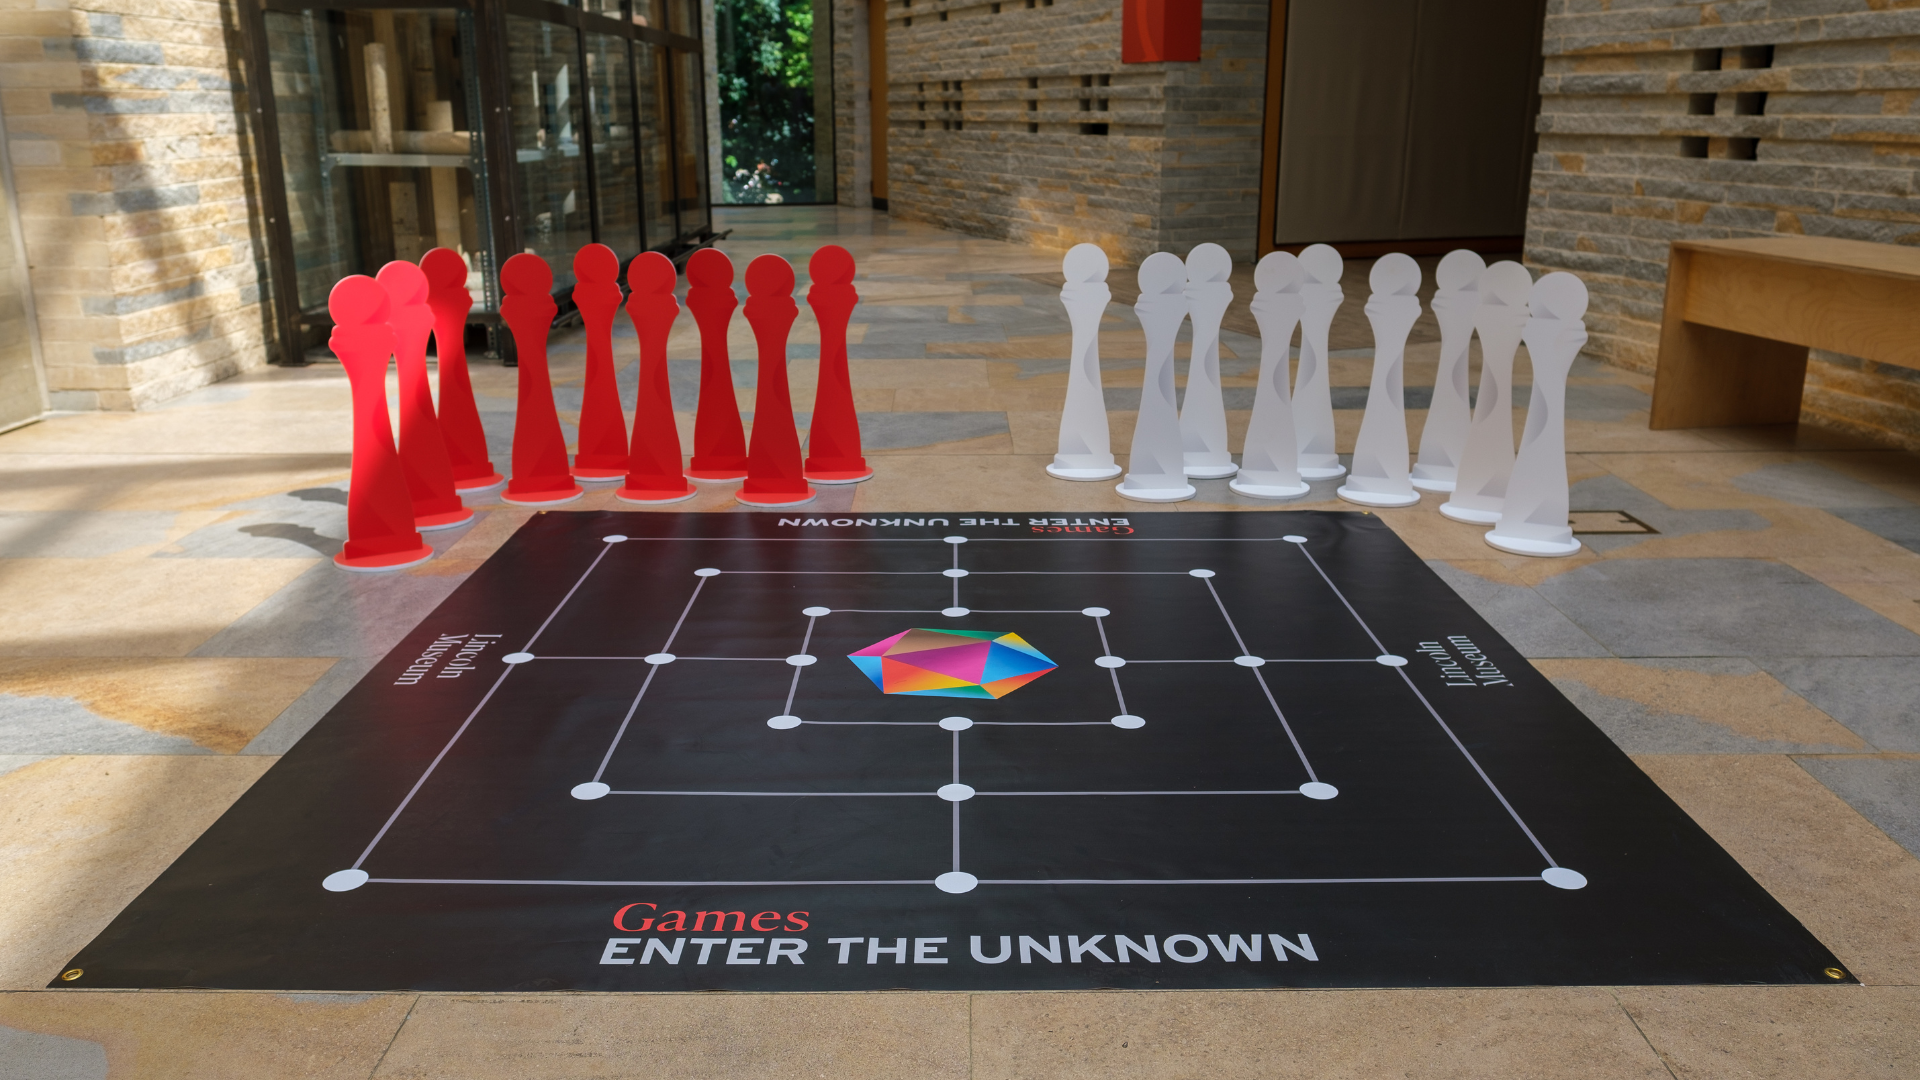 A large board game set up in a museum